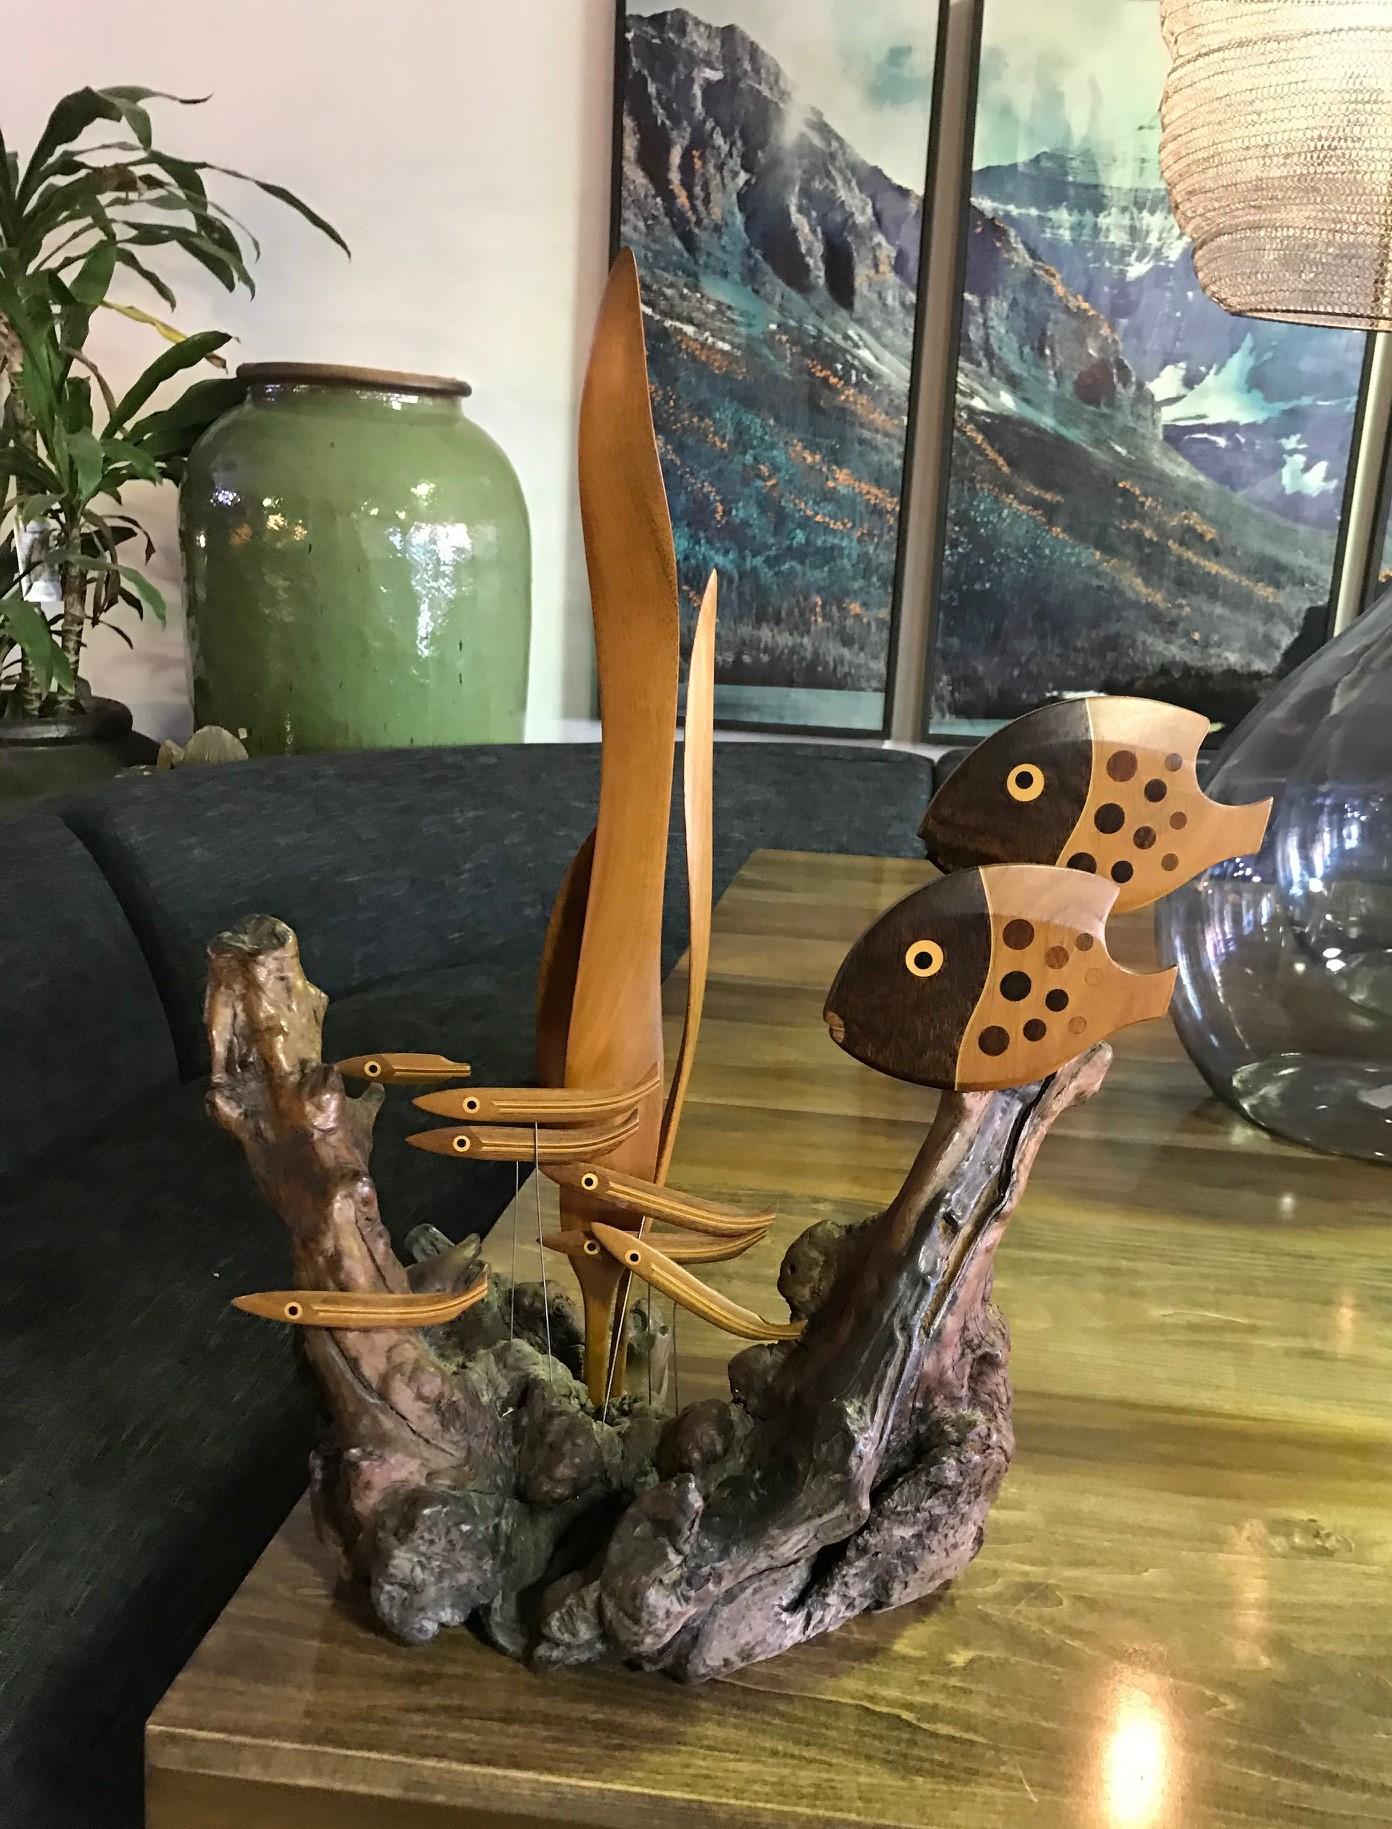 A rather wonderful and whimsical work by wood sculptor/artist Heinz Norhausen. 

Made from a solid, organic wood base. The sculpture features underwater plants, various fish and marine life in an aquatic scene. Quite inventive.

Signed and